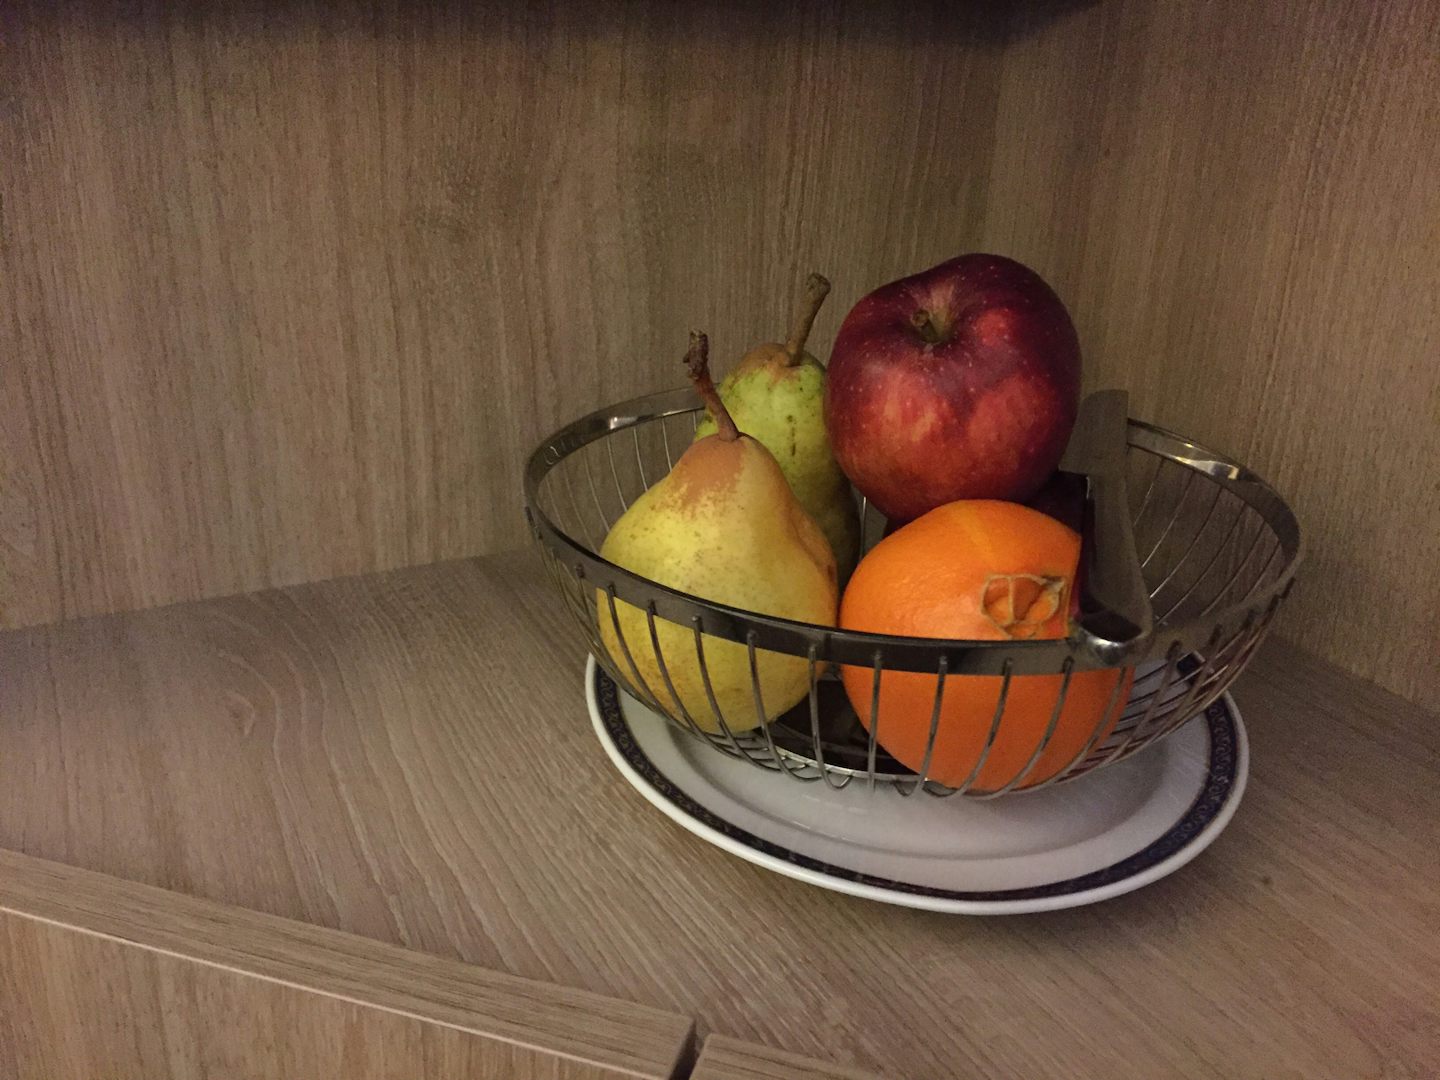 I loved the custom fruit basket in the staterooms